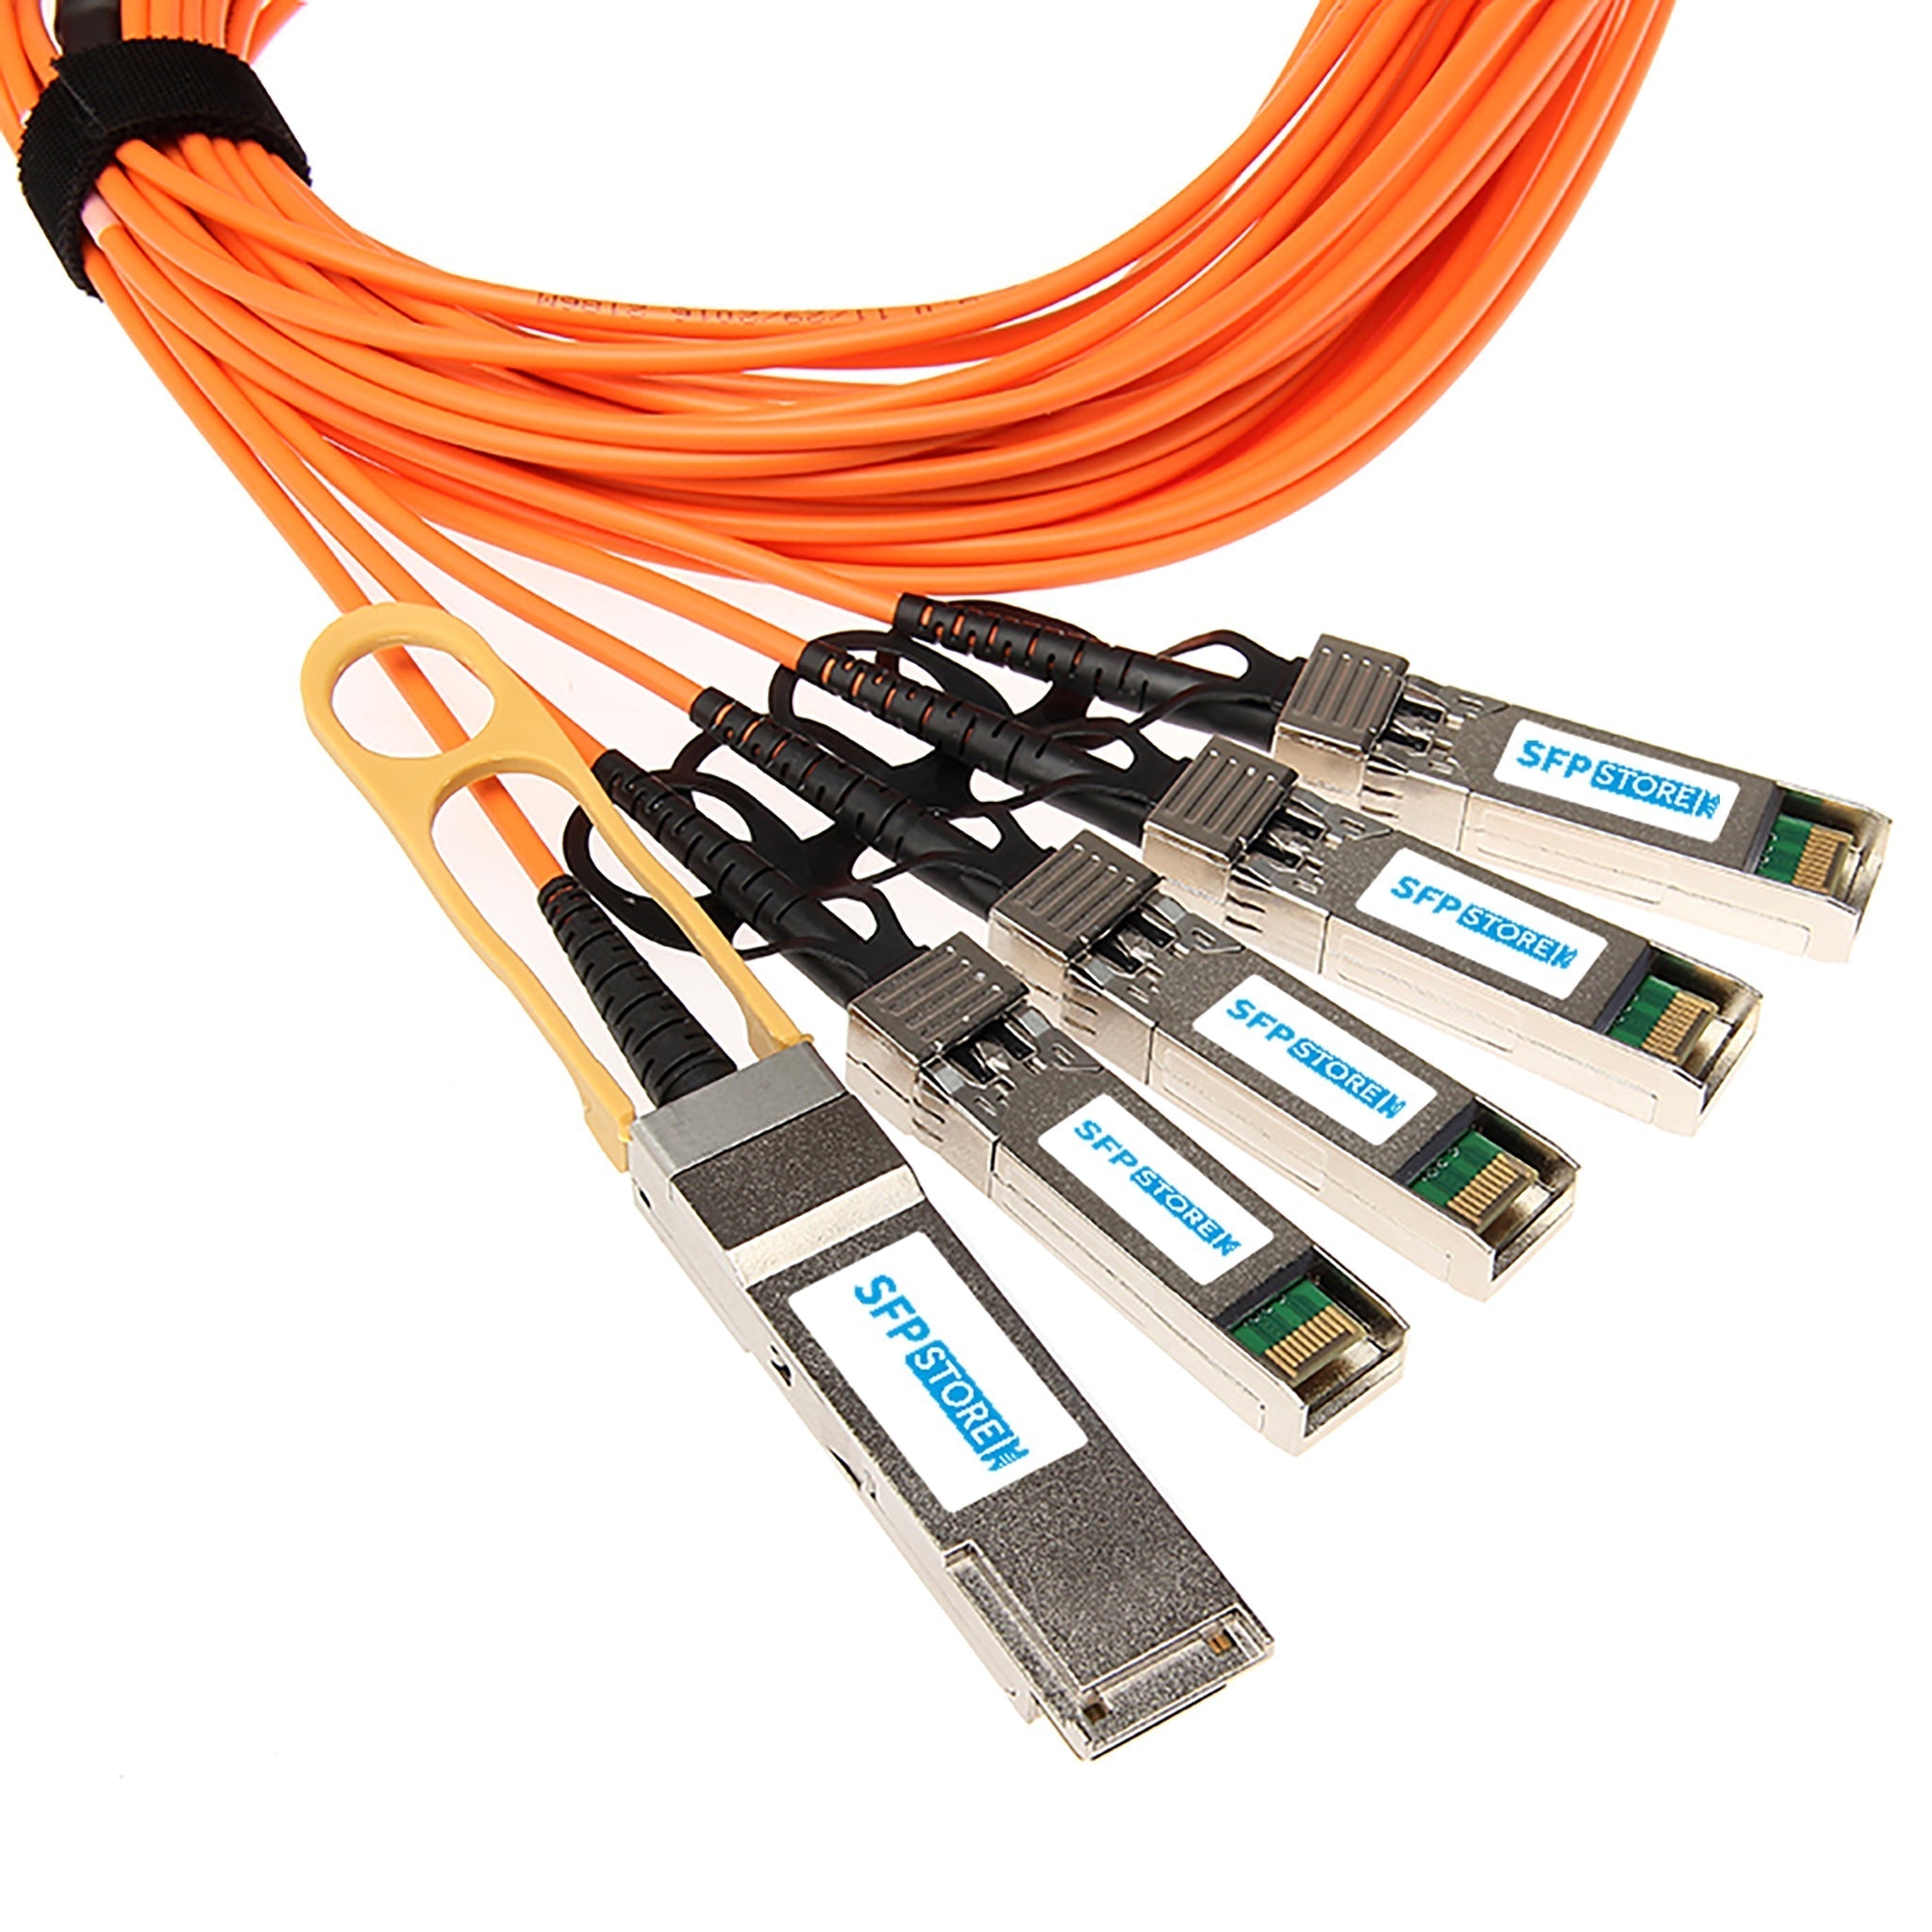 AOC-QSFP-4SFP-10G-3M-C - 3m Dell Compatible 40G QSFP+ to 4 x 10G SFP+ Active Optical Cable